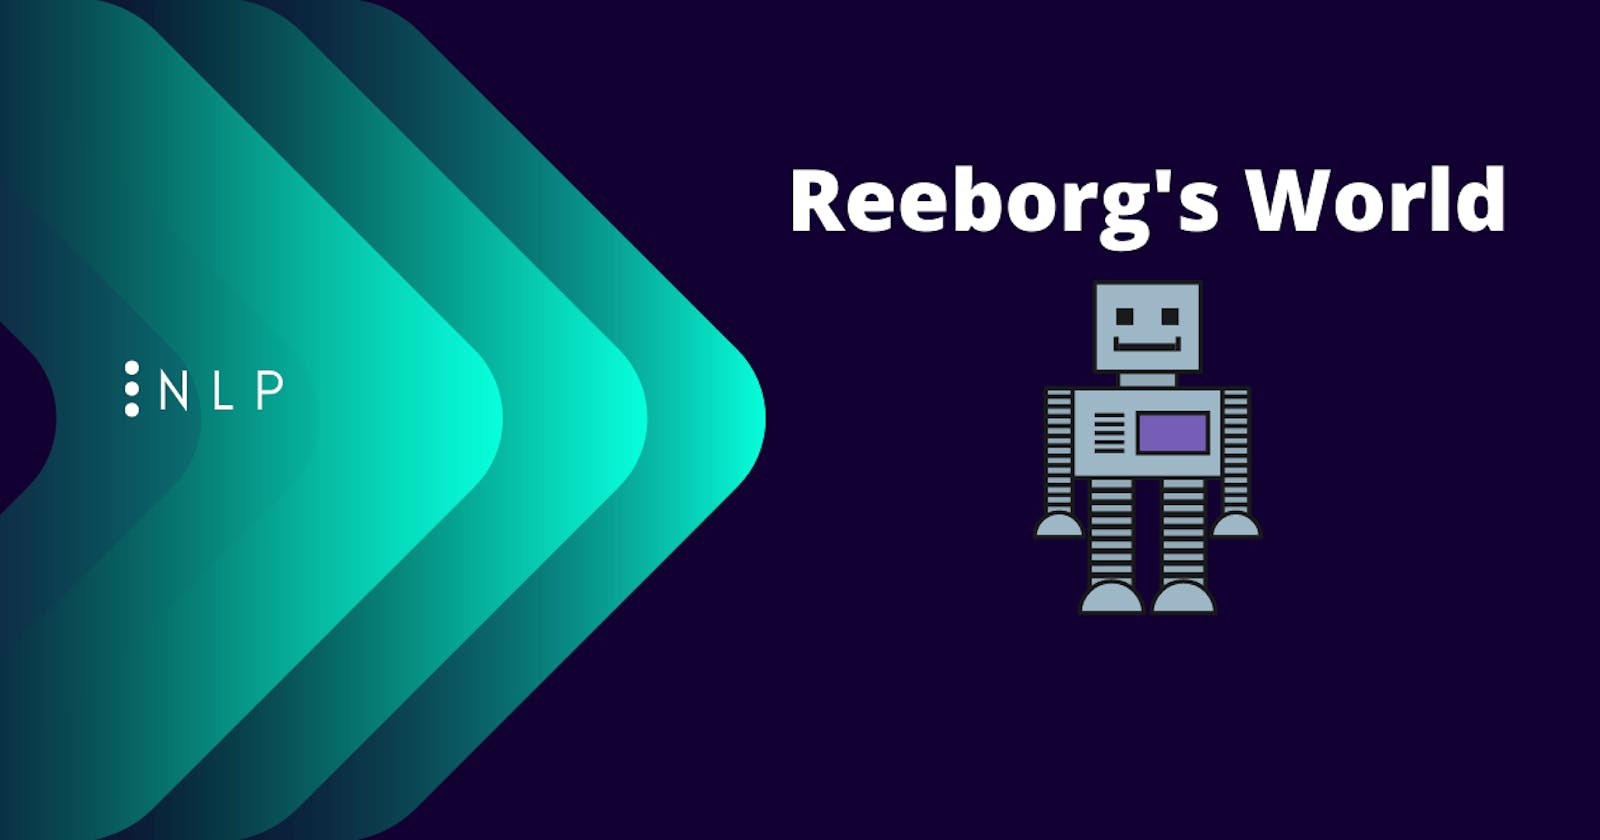 Using Reeborg's world to learn Python